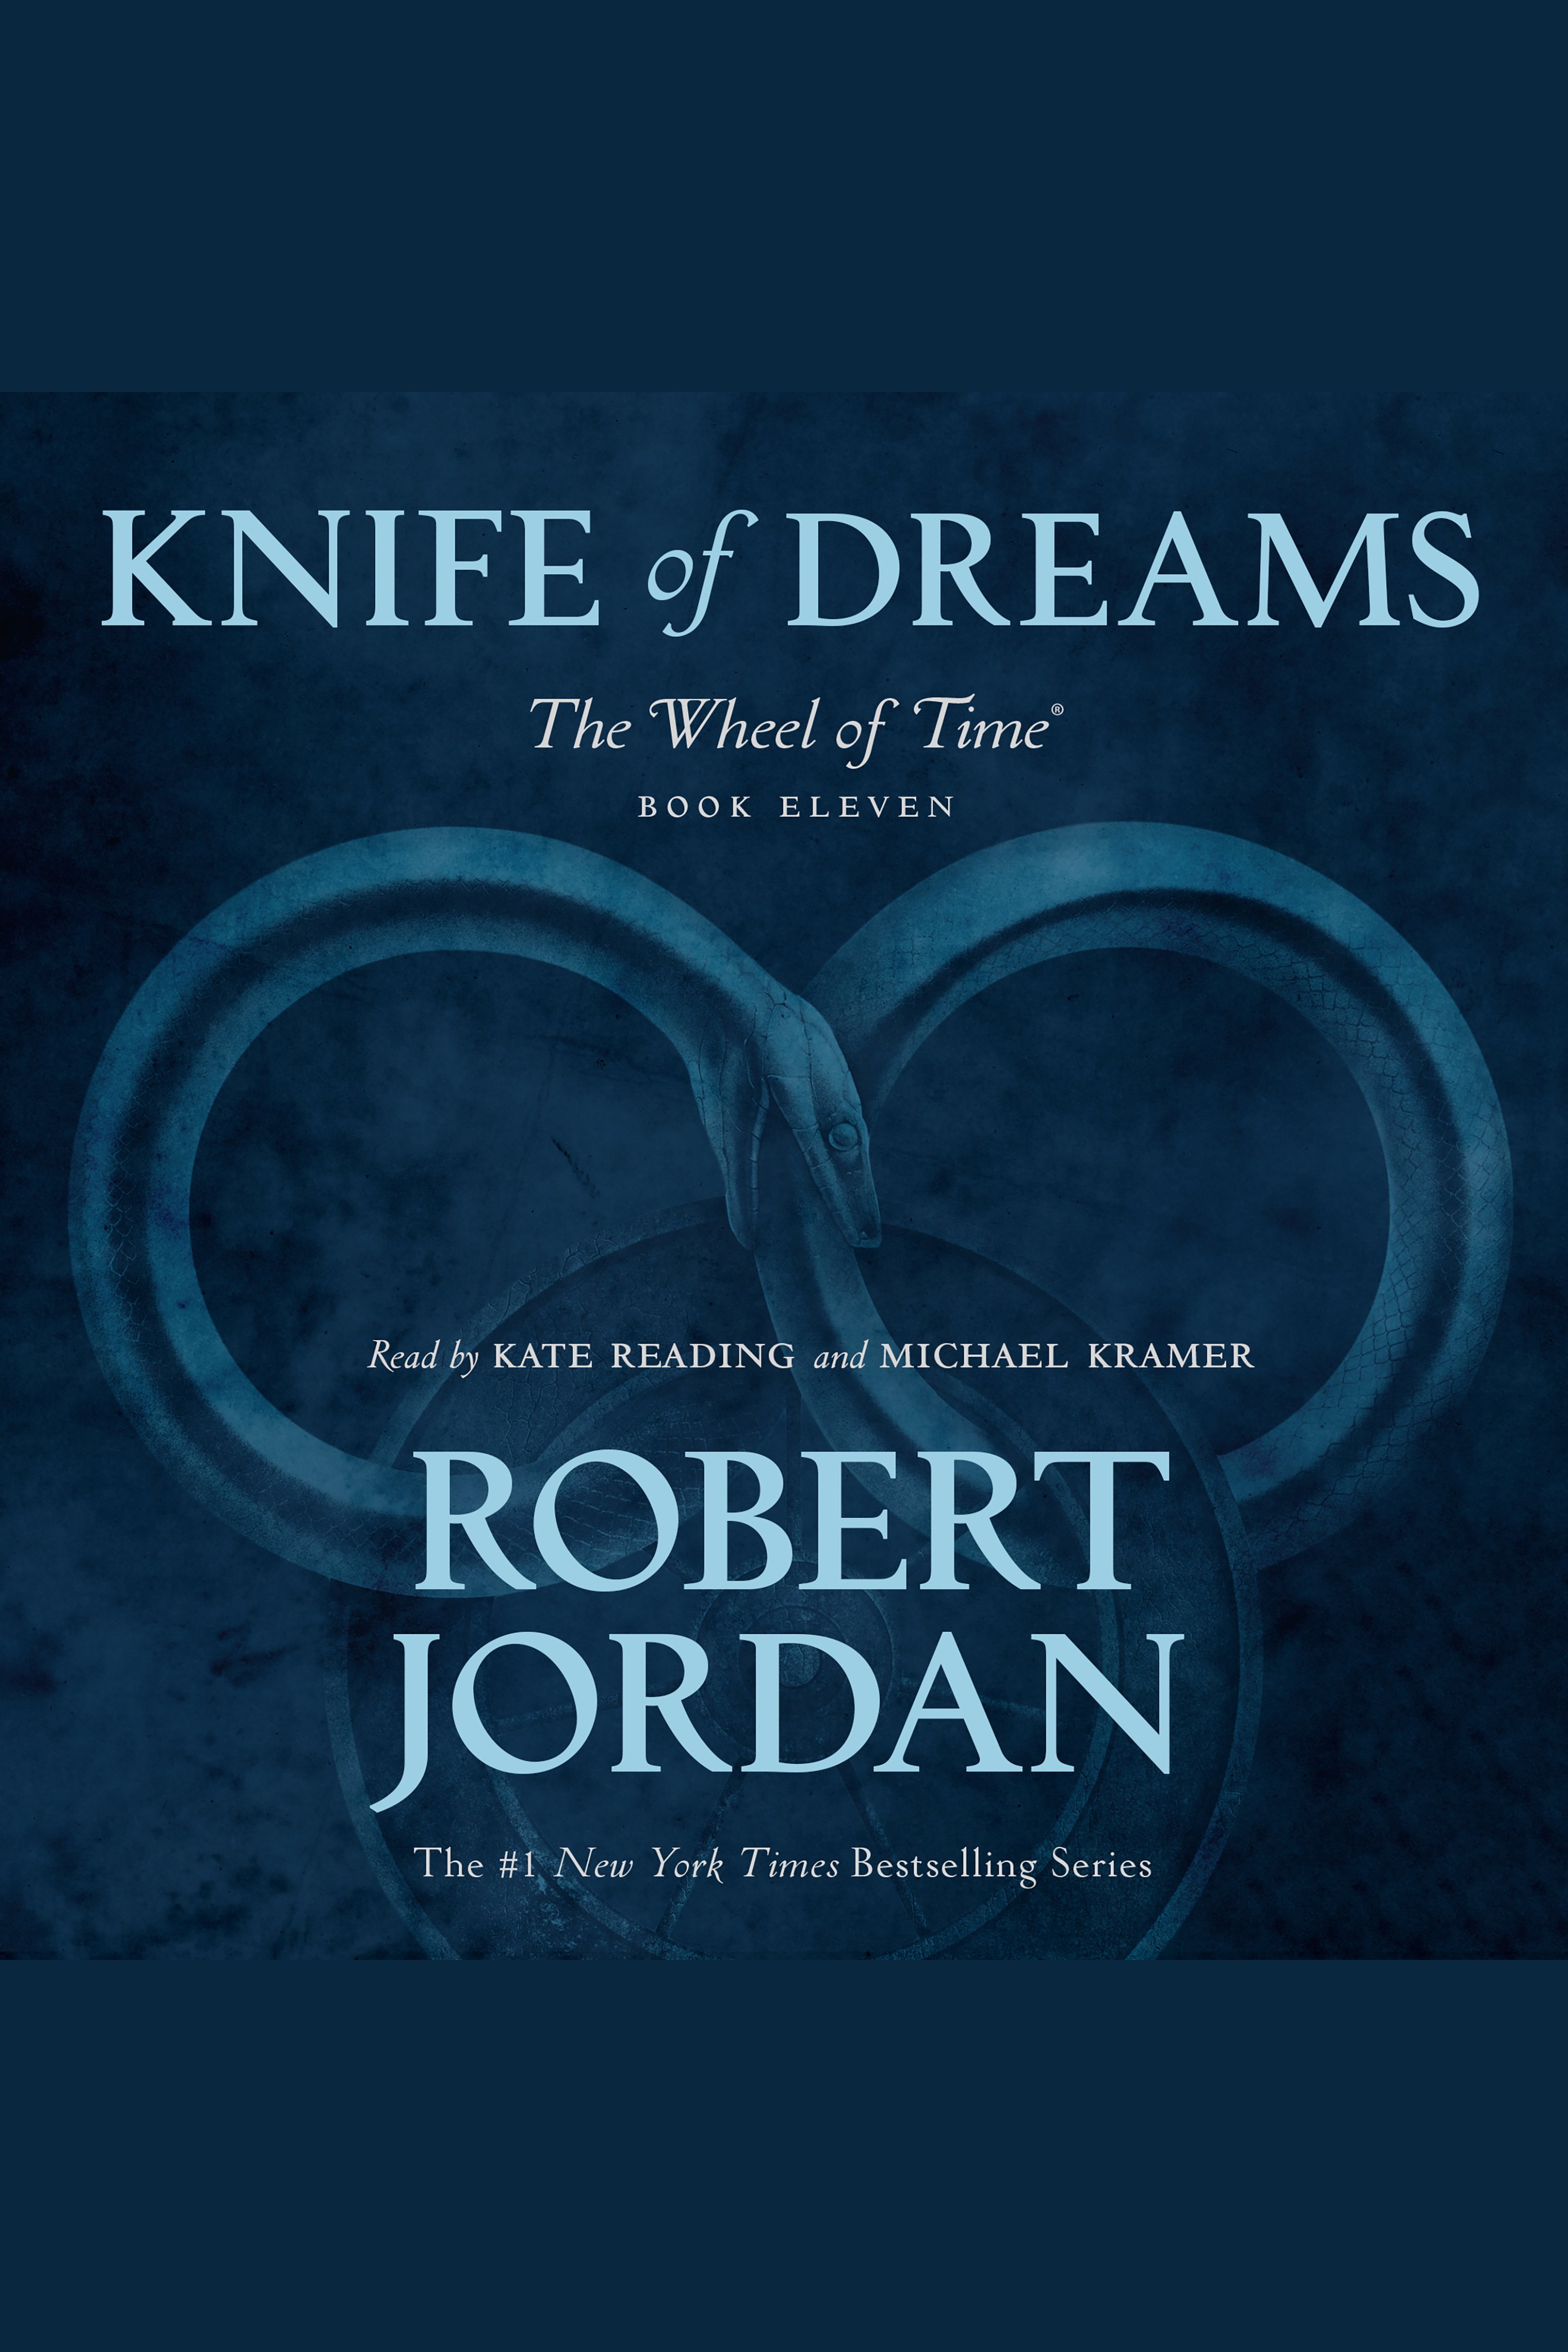 Knife of dreams' cover image